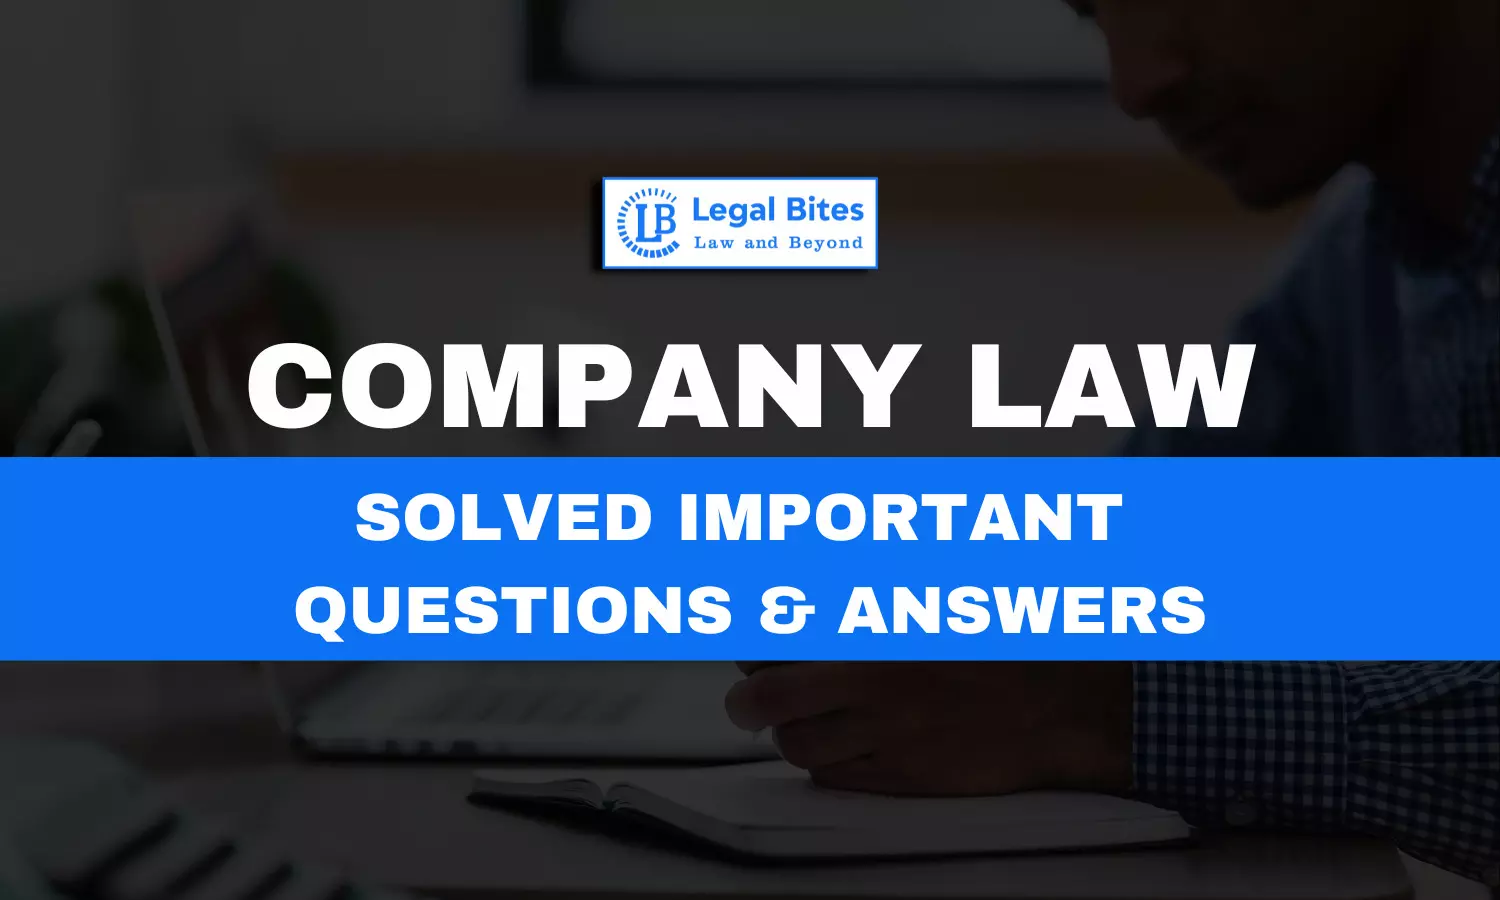 Explain Oppression and mismanagement in Company Management under Indian Companies Act and who can approach can approach the Court in this regard.